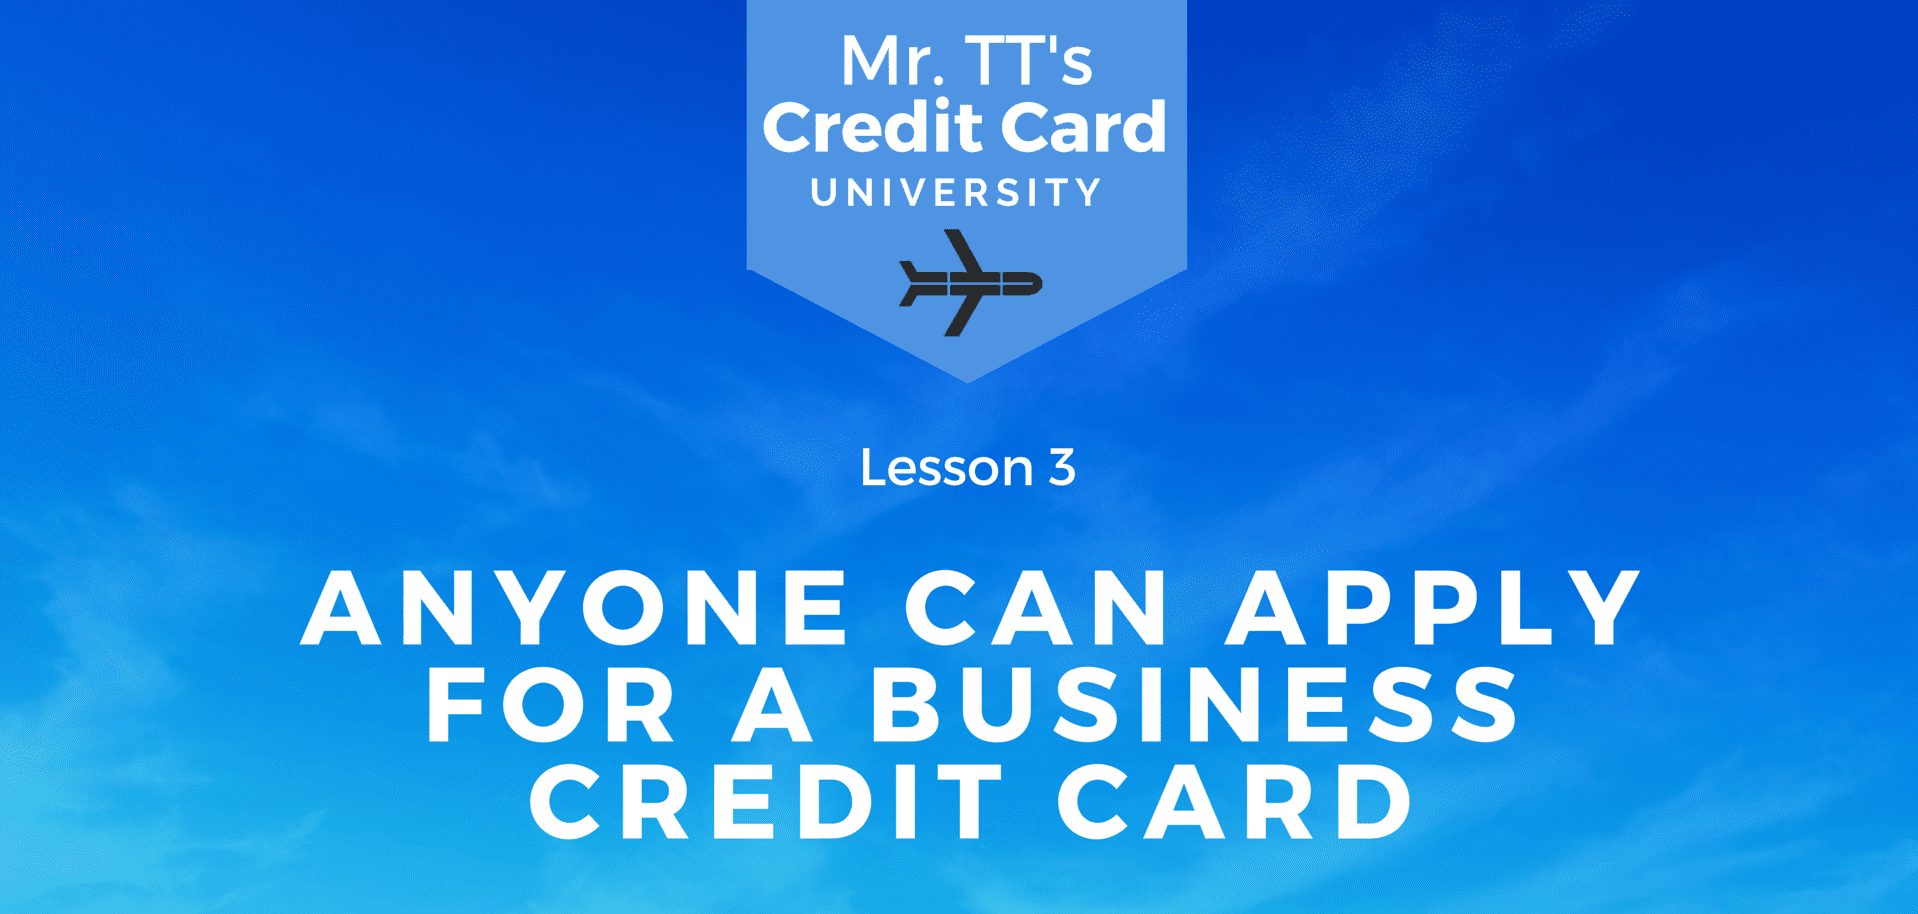 Anyone can apply for a business credit card